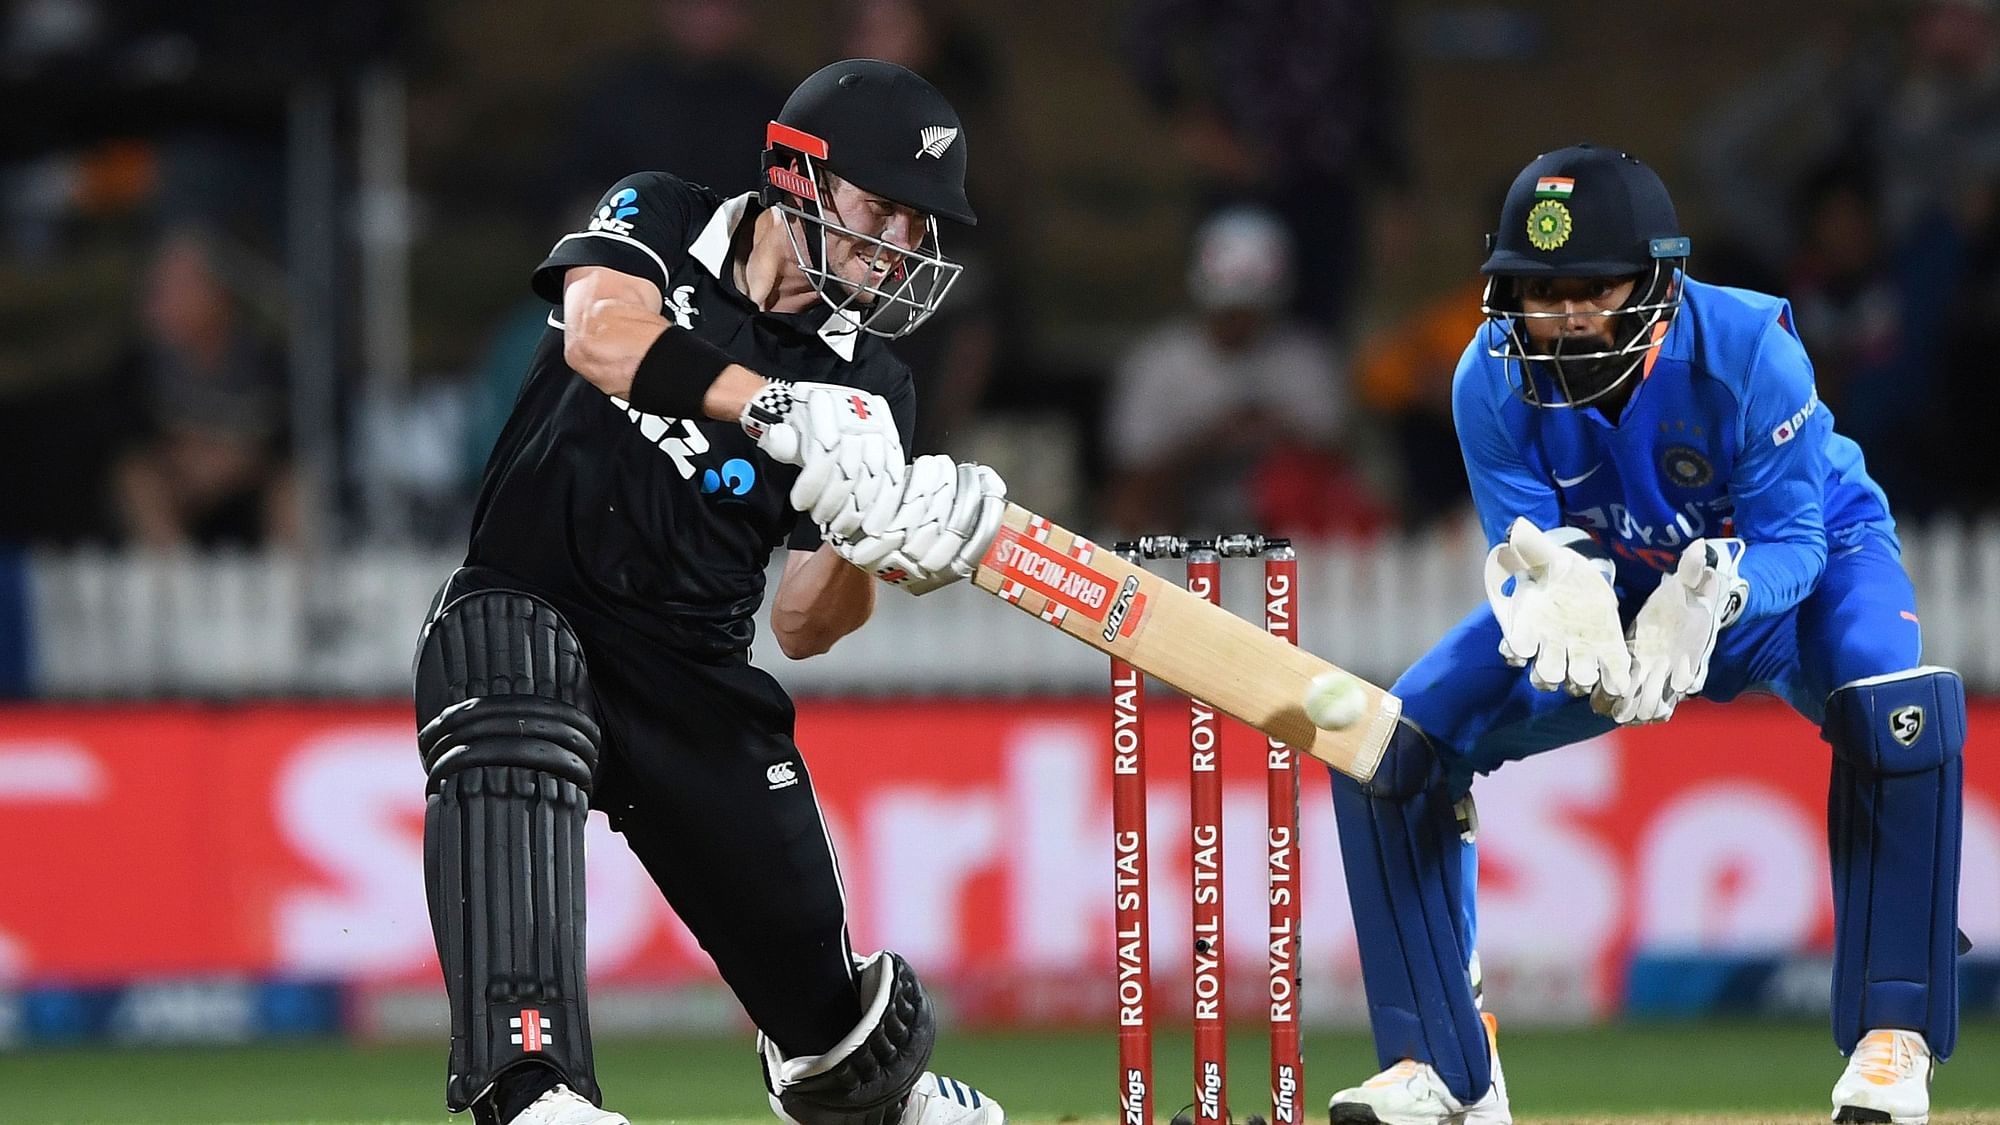 Riding on Ross Taylor’s 21st hundred, the hosts chased down their highest total in ODIs on Wednesday to take a 1-0 lead in the three-match series.